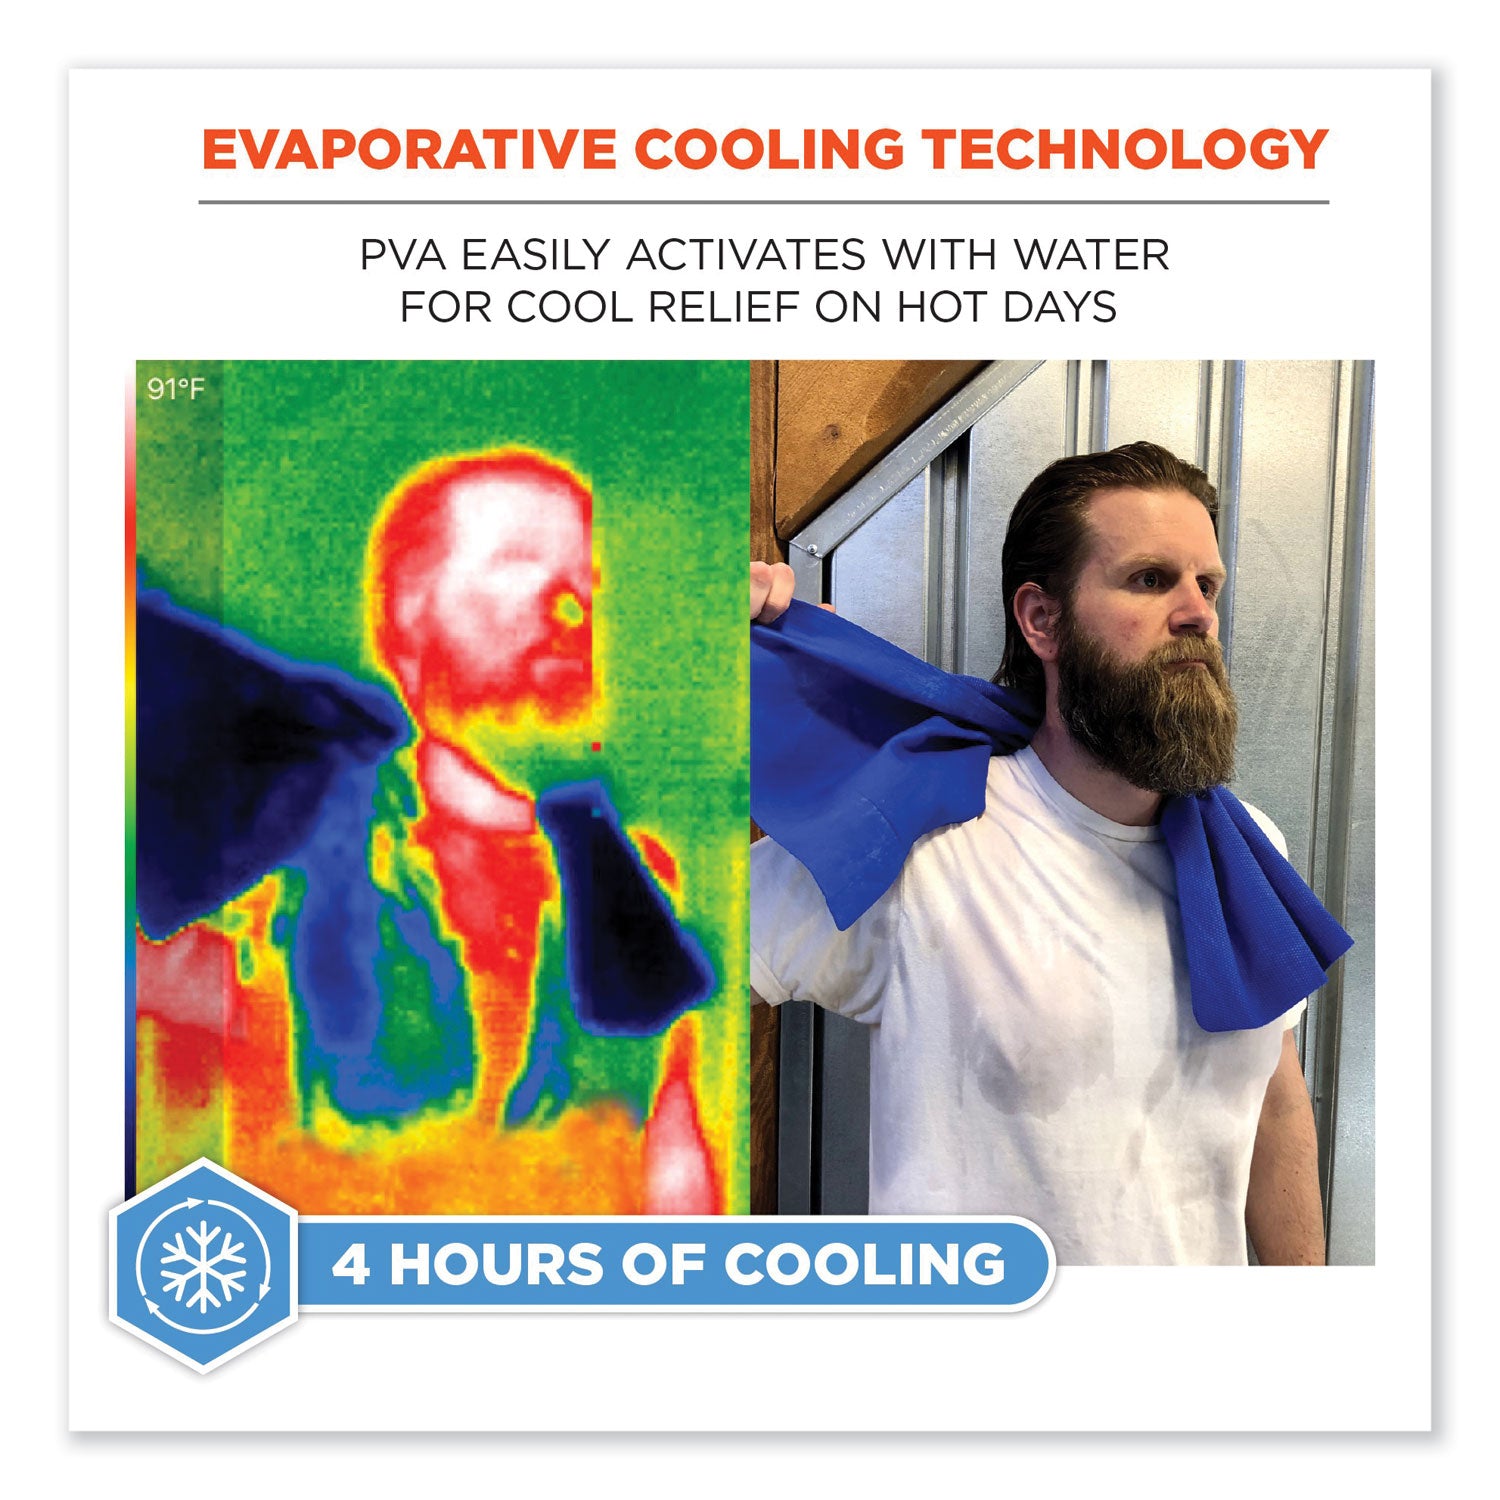 chill-its-6602-evaporative-pva-cooling-towel-295-x-13-one-size-fits-most-pva-gray-ships-in-1-3-business-days_ego12438 - 2